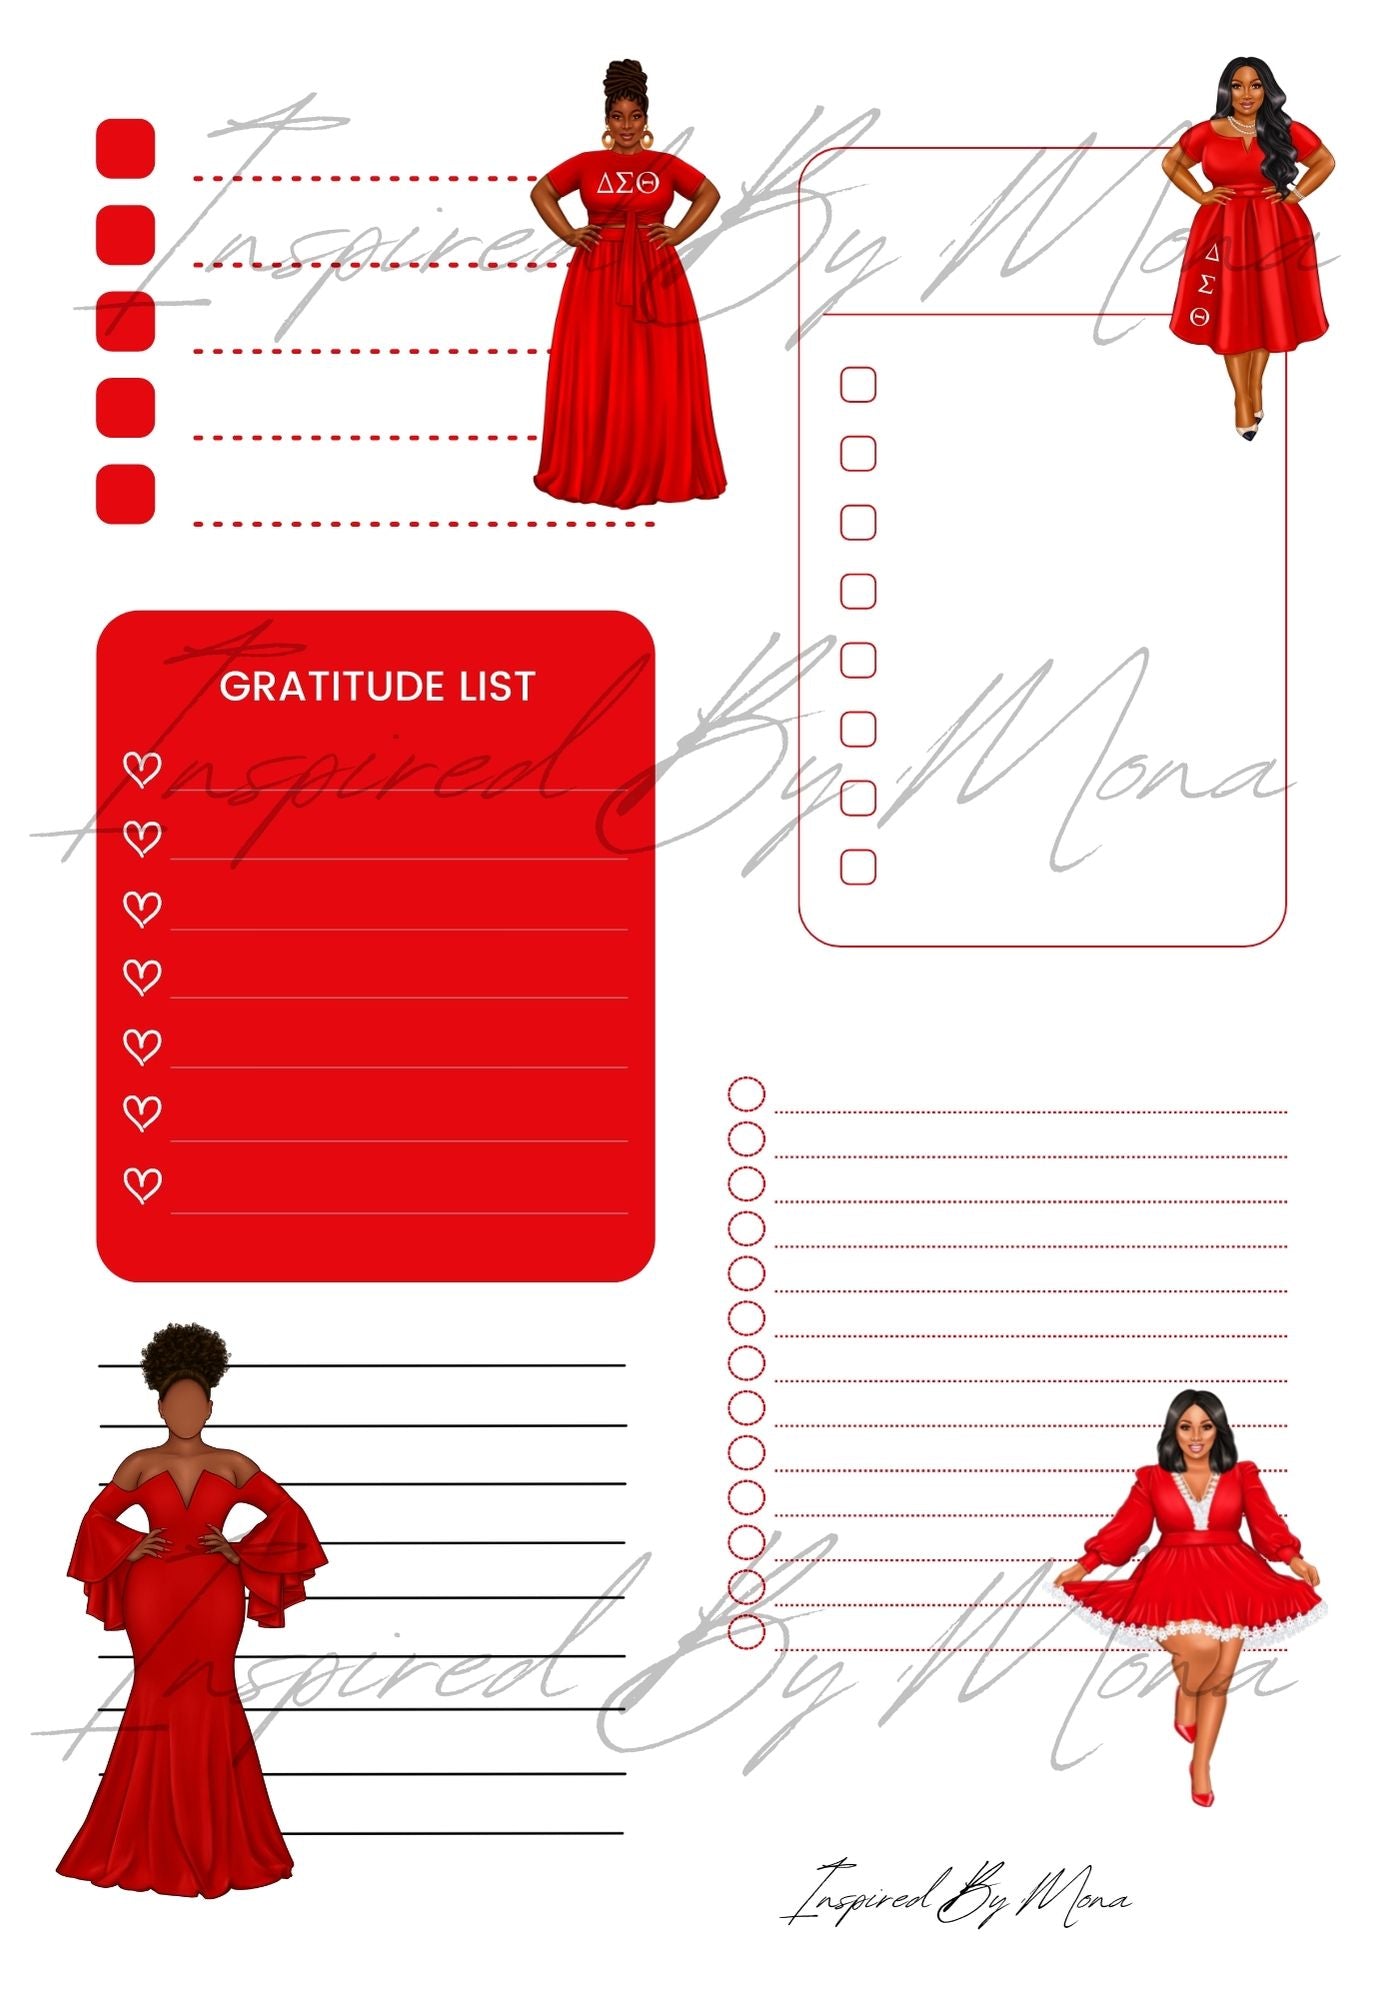 NEW DST Planner (Undated) & DST Stickers